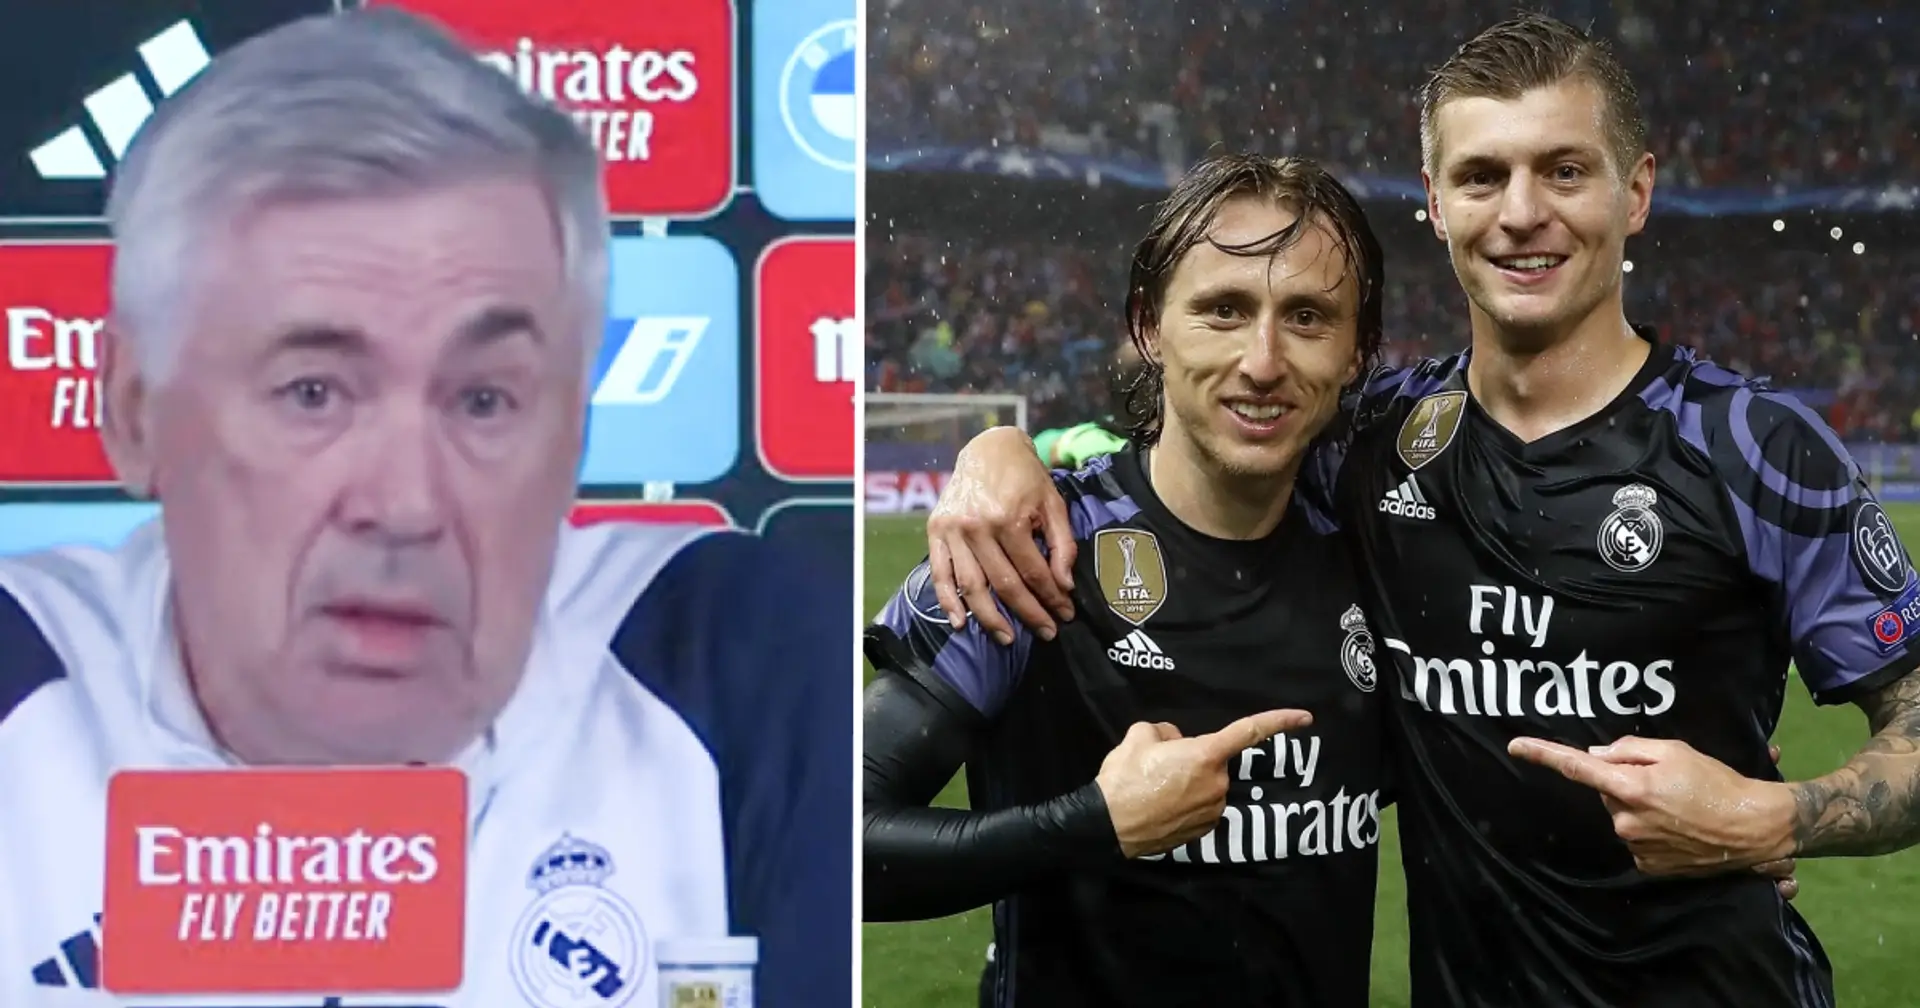 Contract expiring in 6 months: Ancelotti reveals Real Madrid plan for Modric, Kroos, Nacho